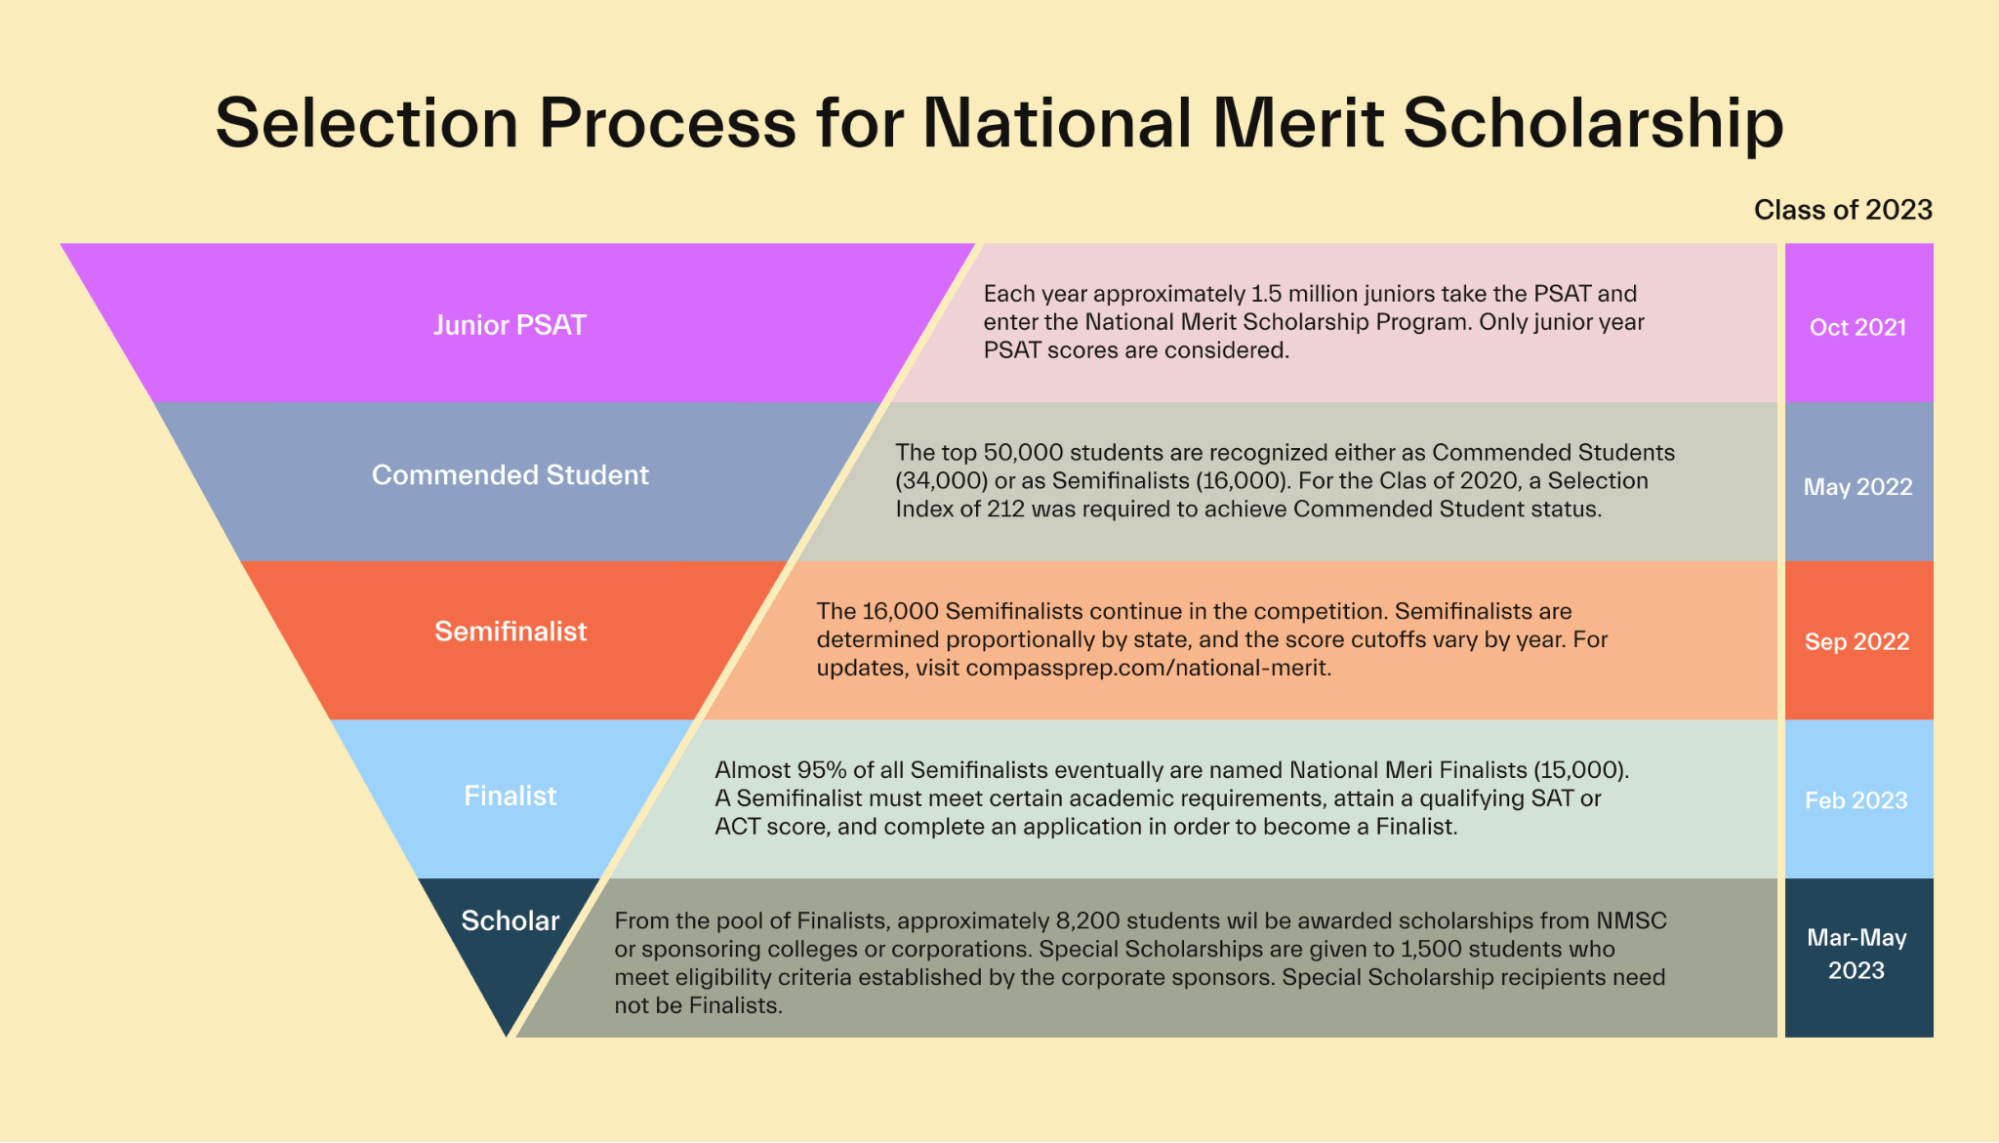 Selection Process for National Merit Scholarship